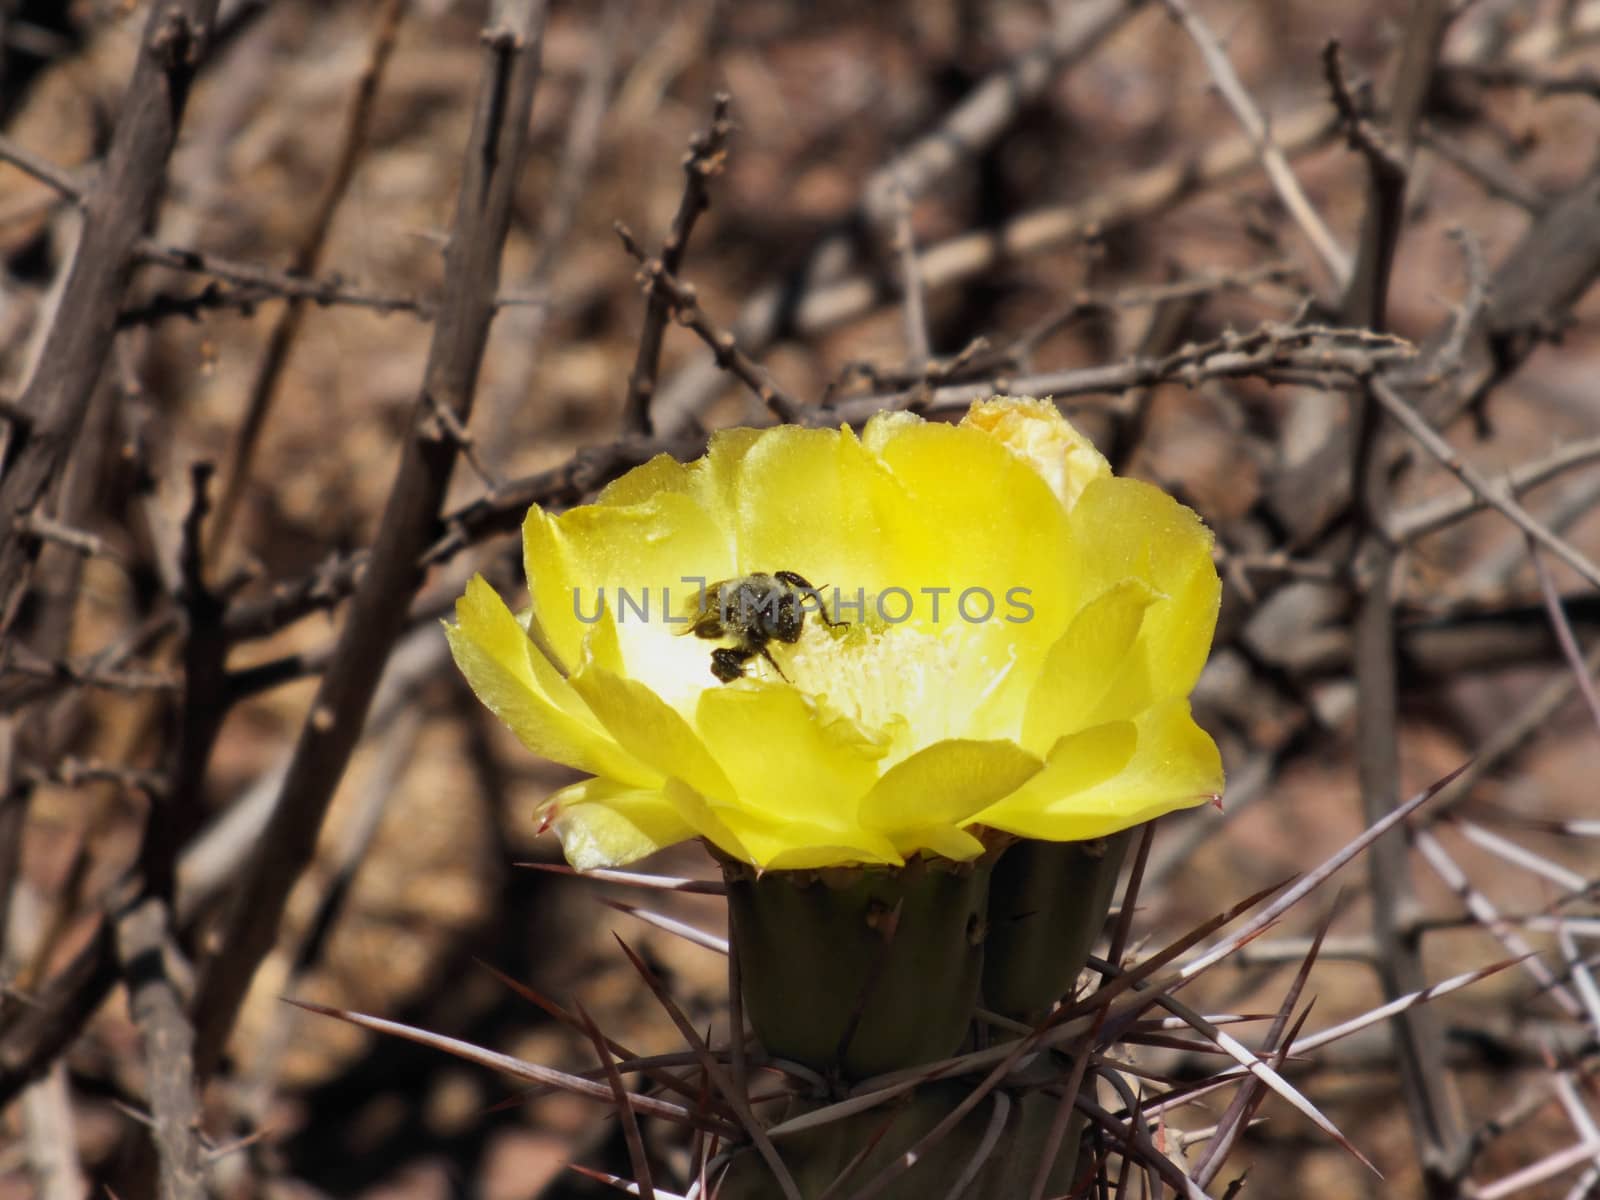 A close up photo of a bee pollinating a Jointed Prickly-pear cactus flower